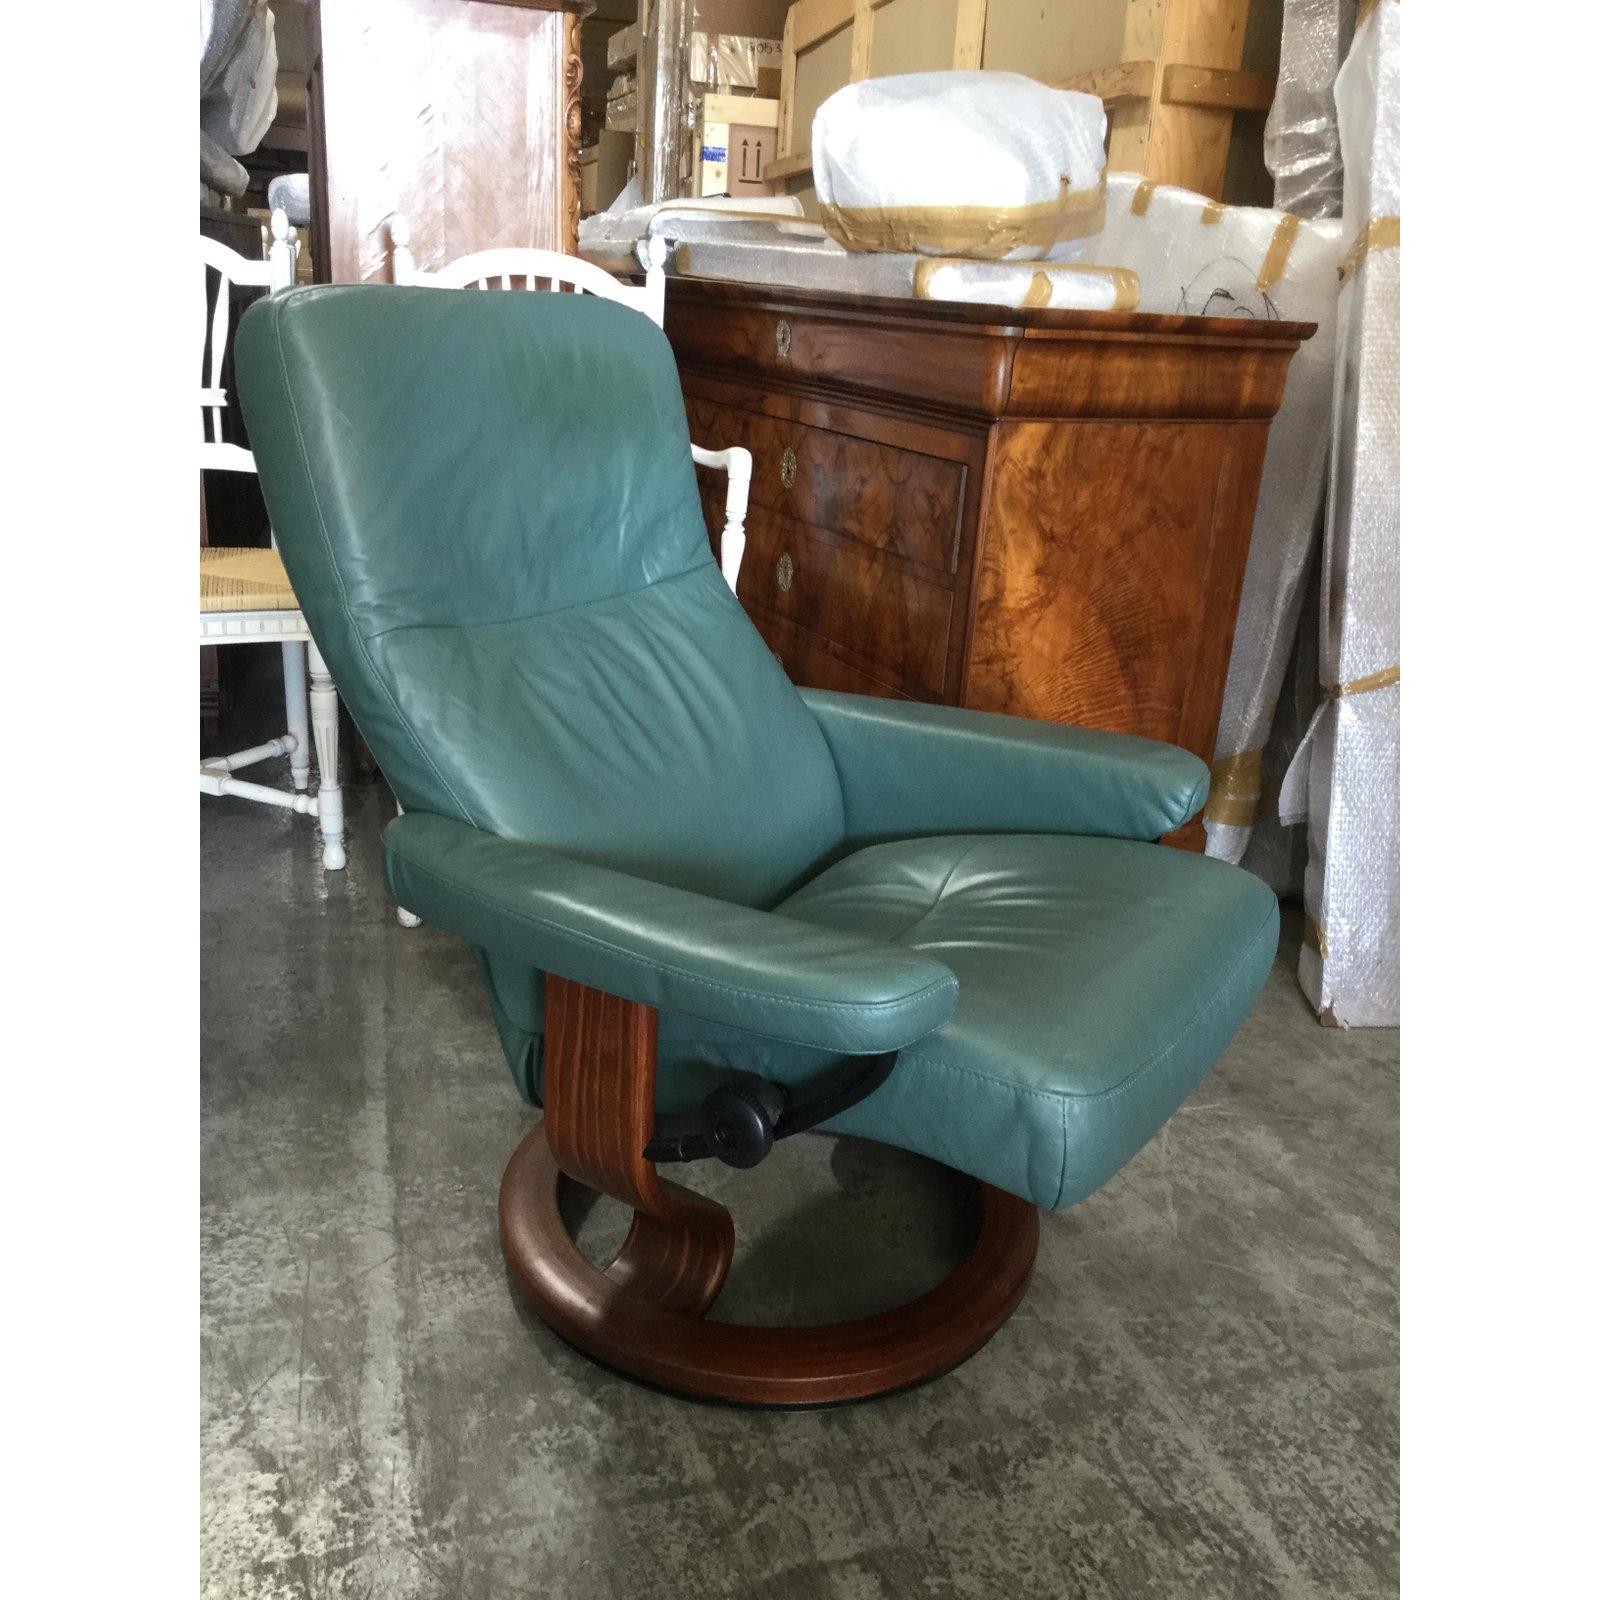 Beautiful pair of Scandinavian Eckhorns Stressless leather chairs with ottomans. Upholstered in soft greenish blue leather, these chairs are famous for providing the utmost comfort. The leather is super soft and is in mint condition.
Reclines to 42